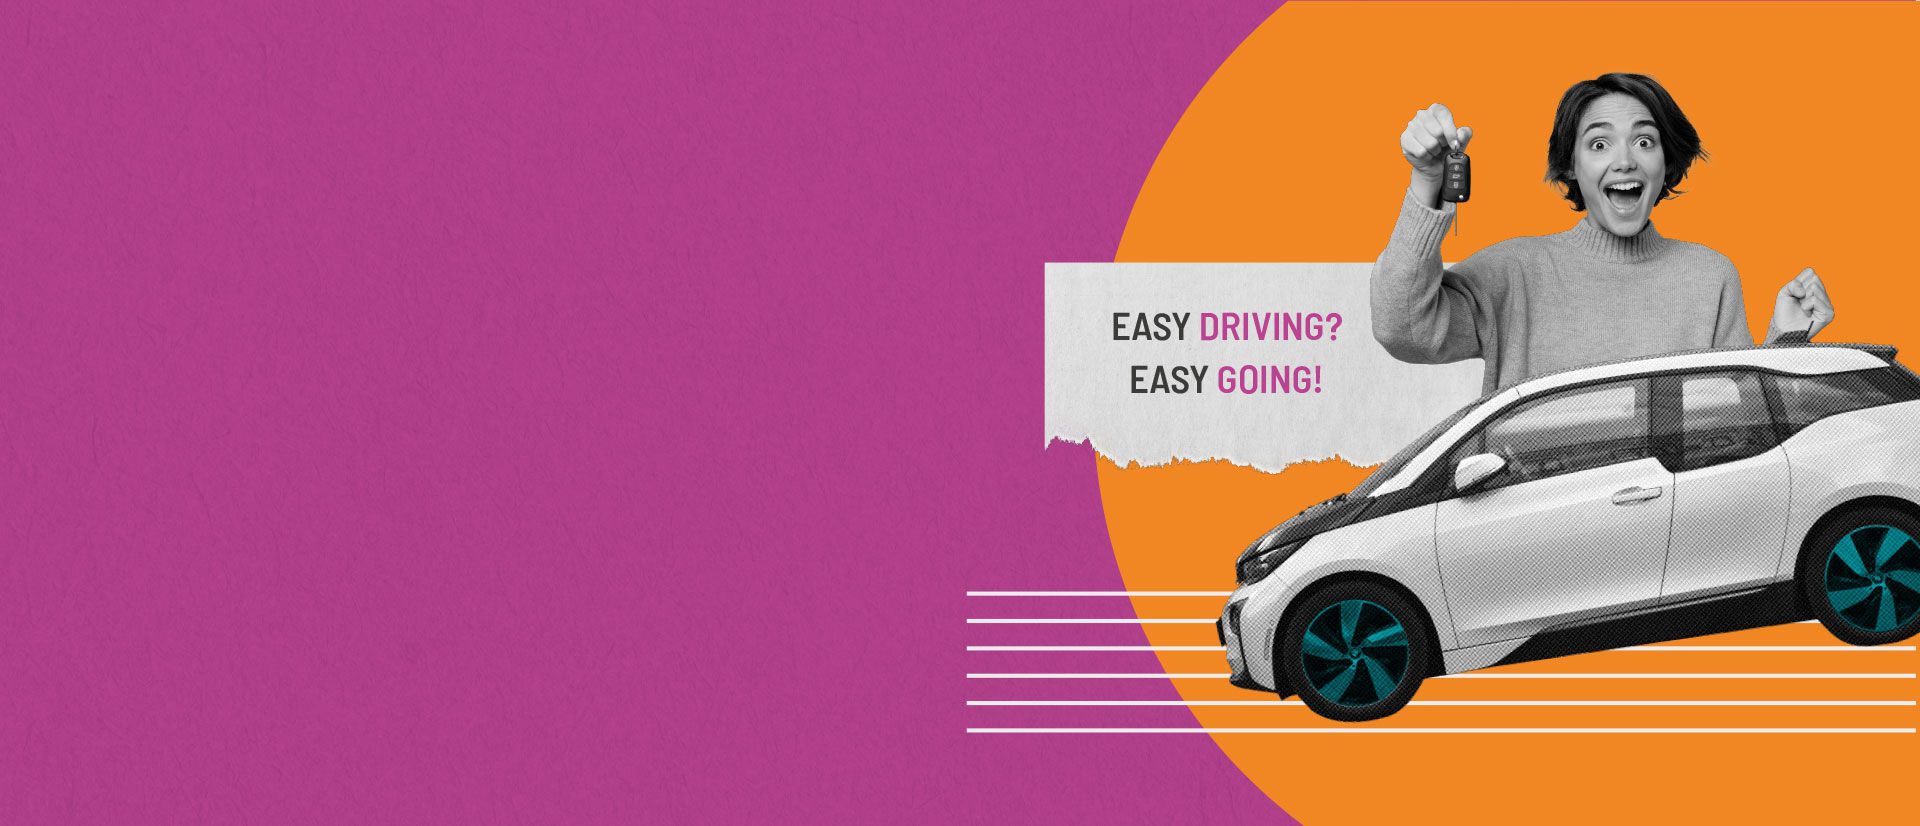 Easy Driving? Easy Going!